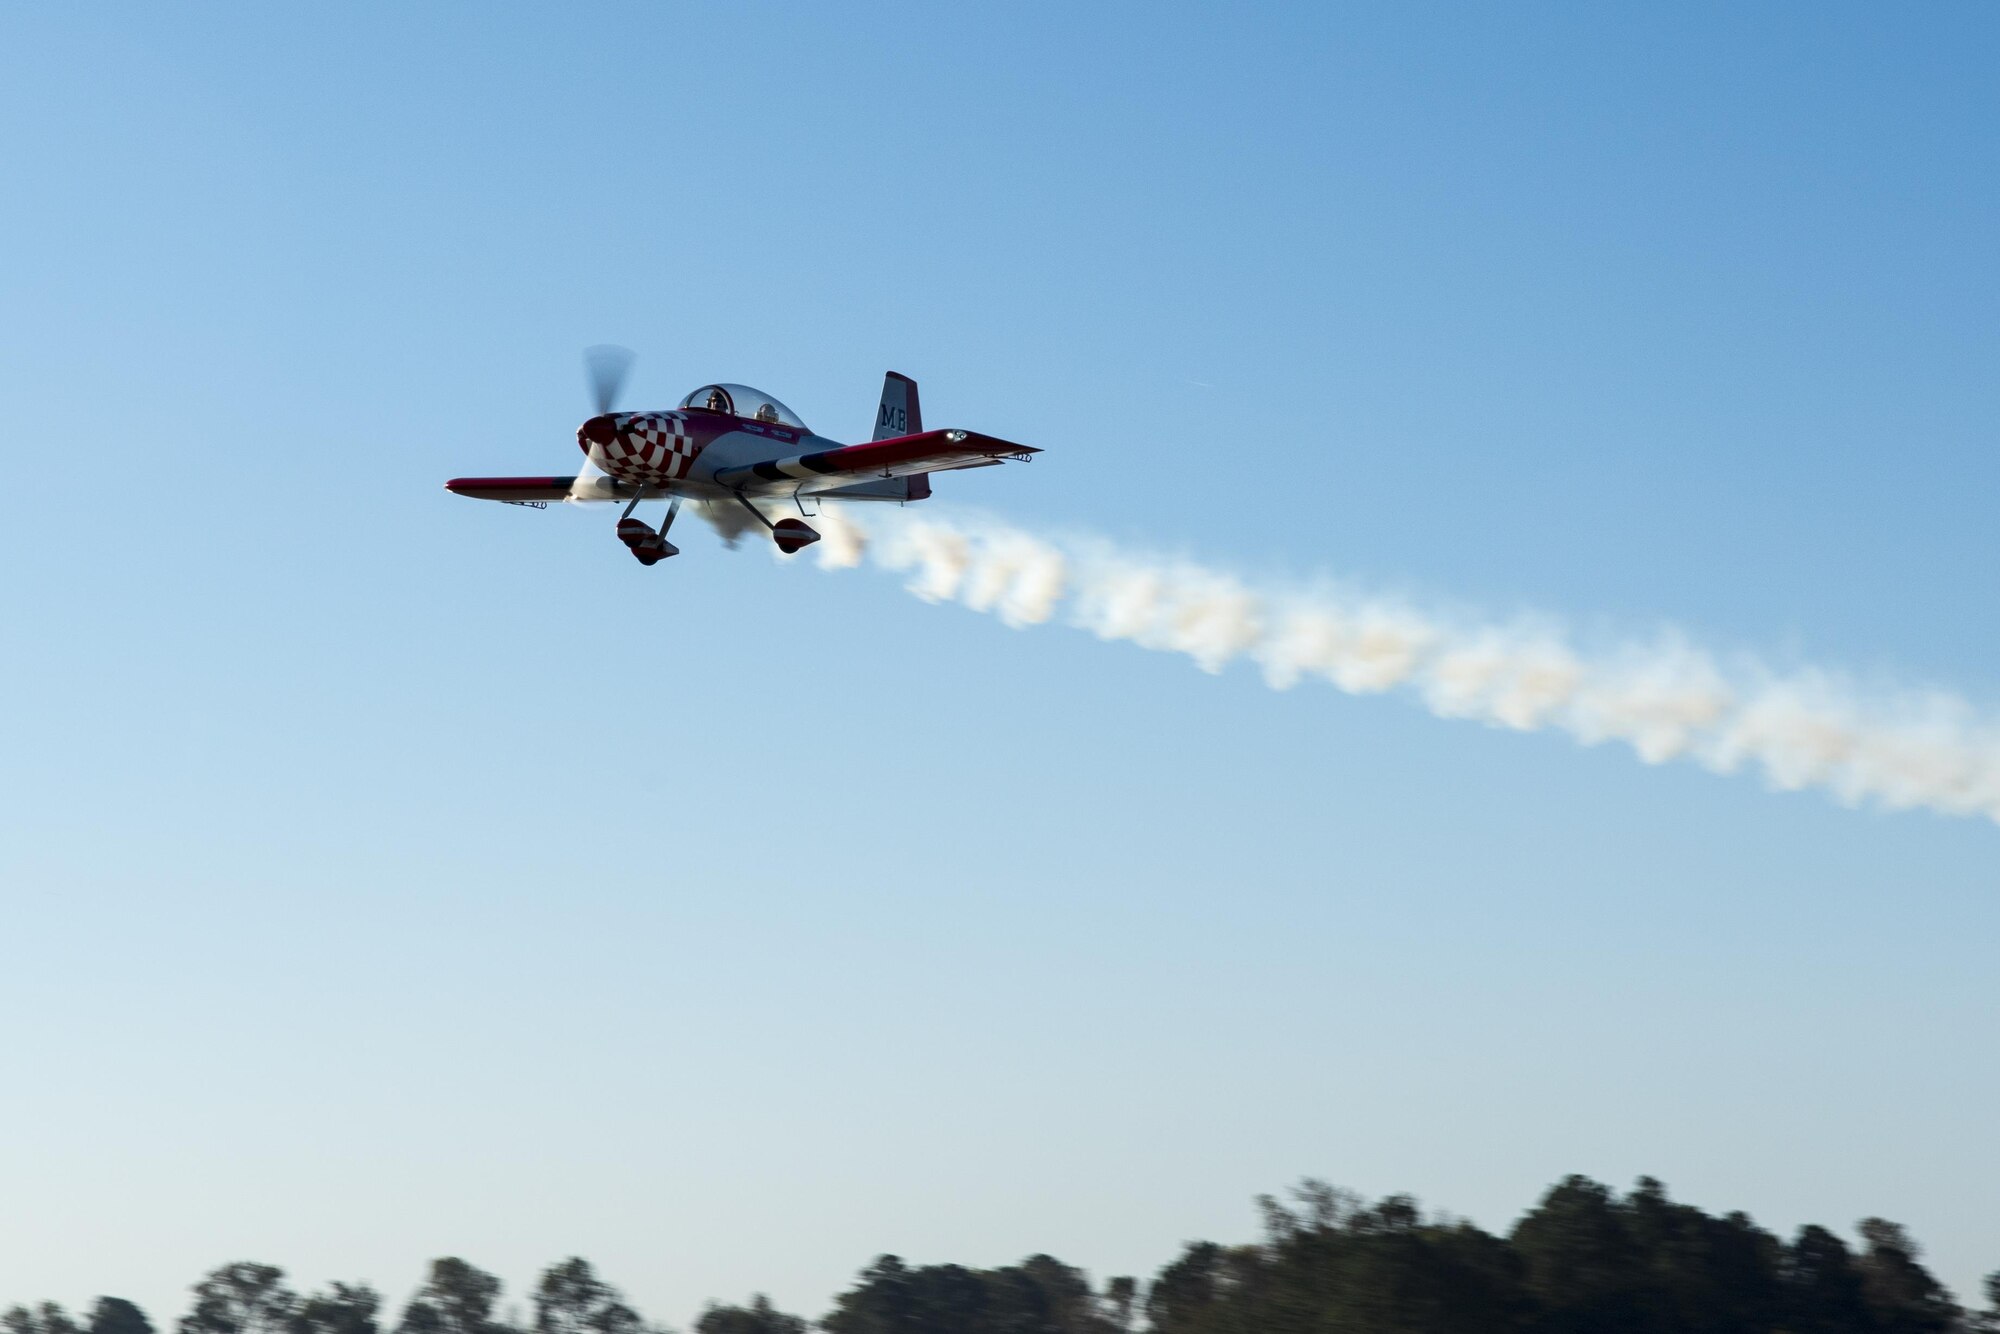 Retired Lt. Col. Bob Ingle, 4th Training Squadron F-15E Strike Eagle subject matter expert, takes off during the annual Scare-a-Controller event, Oct. 29, 2016, at Wayne Executive Jetport in Goldsboro, North Carolina. The purpose of the annual event is to thank air traffic controllers for their role in protecting assets in the skies. (U.S. Air Force photo by Airman Shawna L. Keyes)